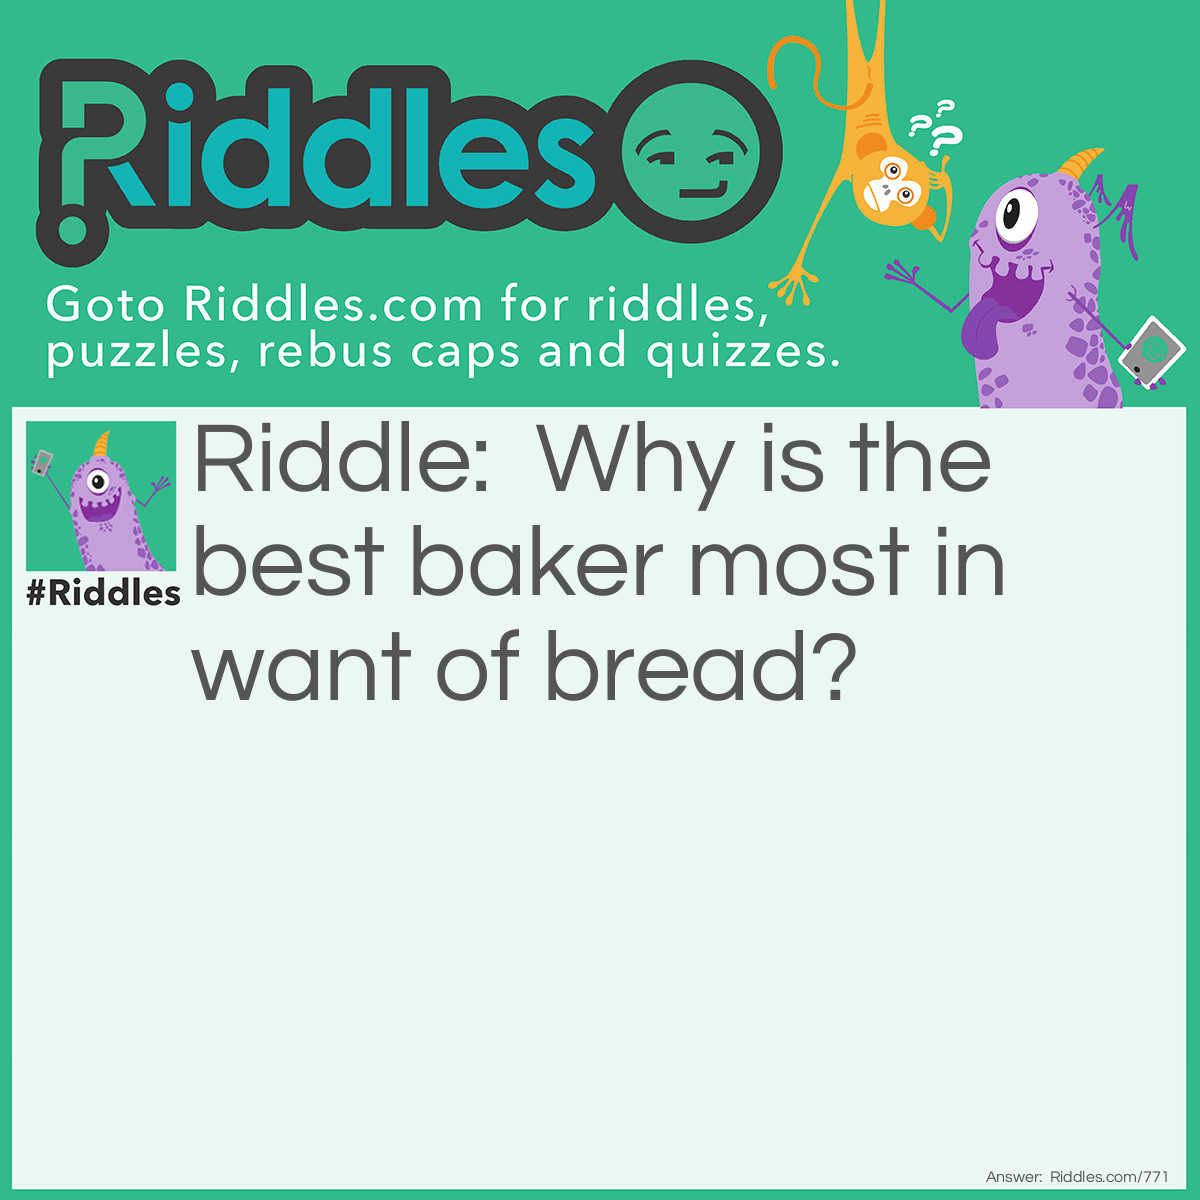 Riddle: Why is the best baker most in want of bread? Answer: Because he kneads (needs) it most.